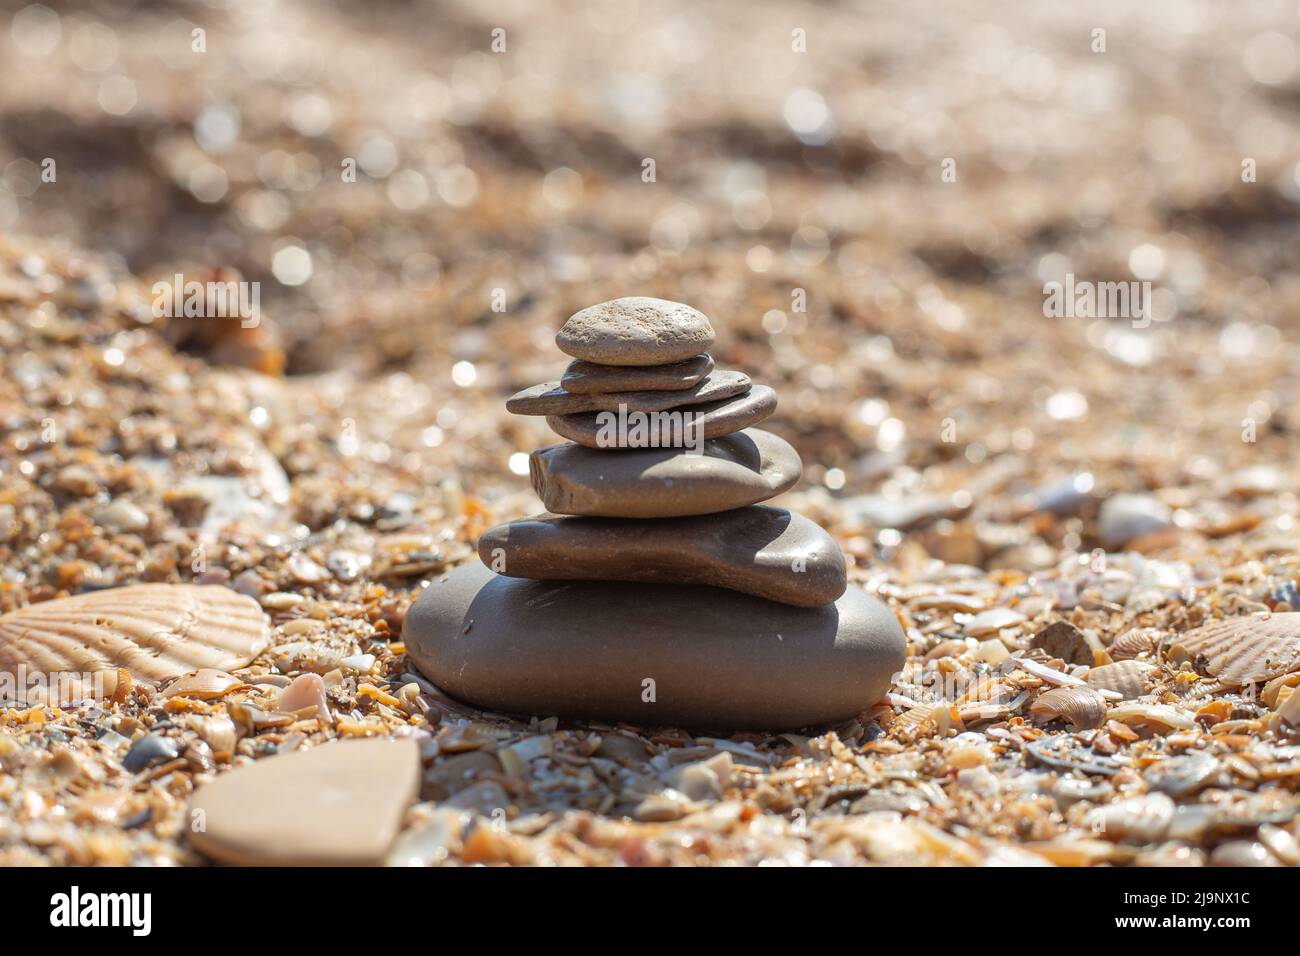 Pyramid of stones laid out on a sandy beach, selective focus. Relaxation and balance. Stock Photo